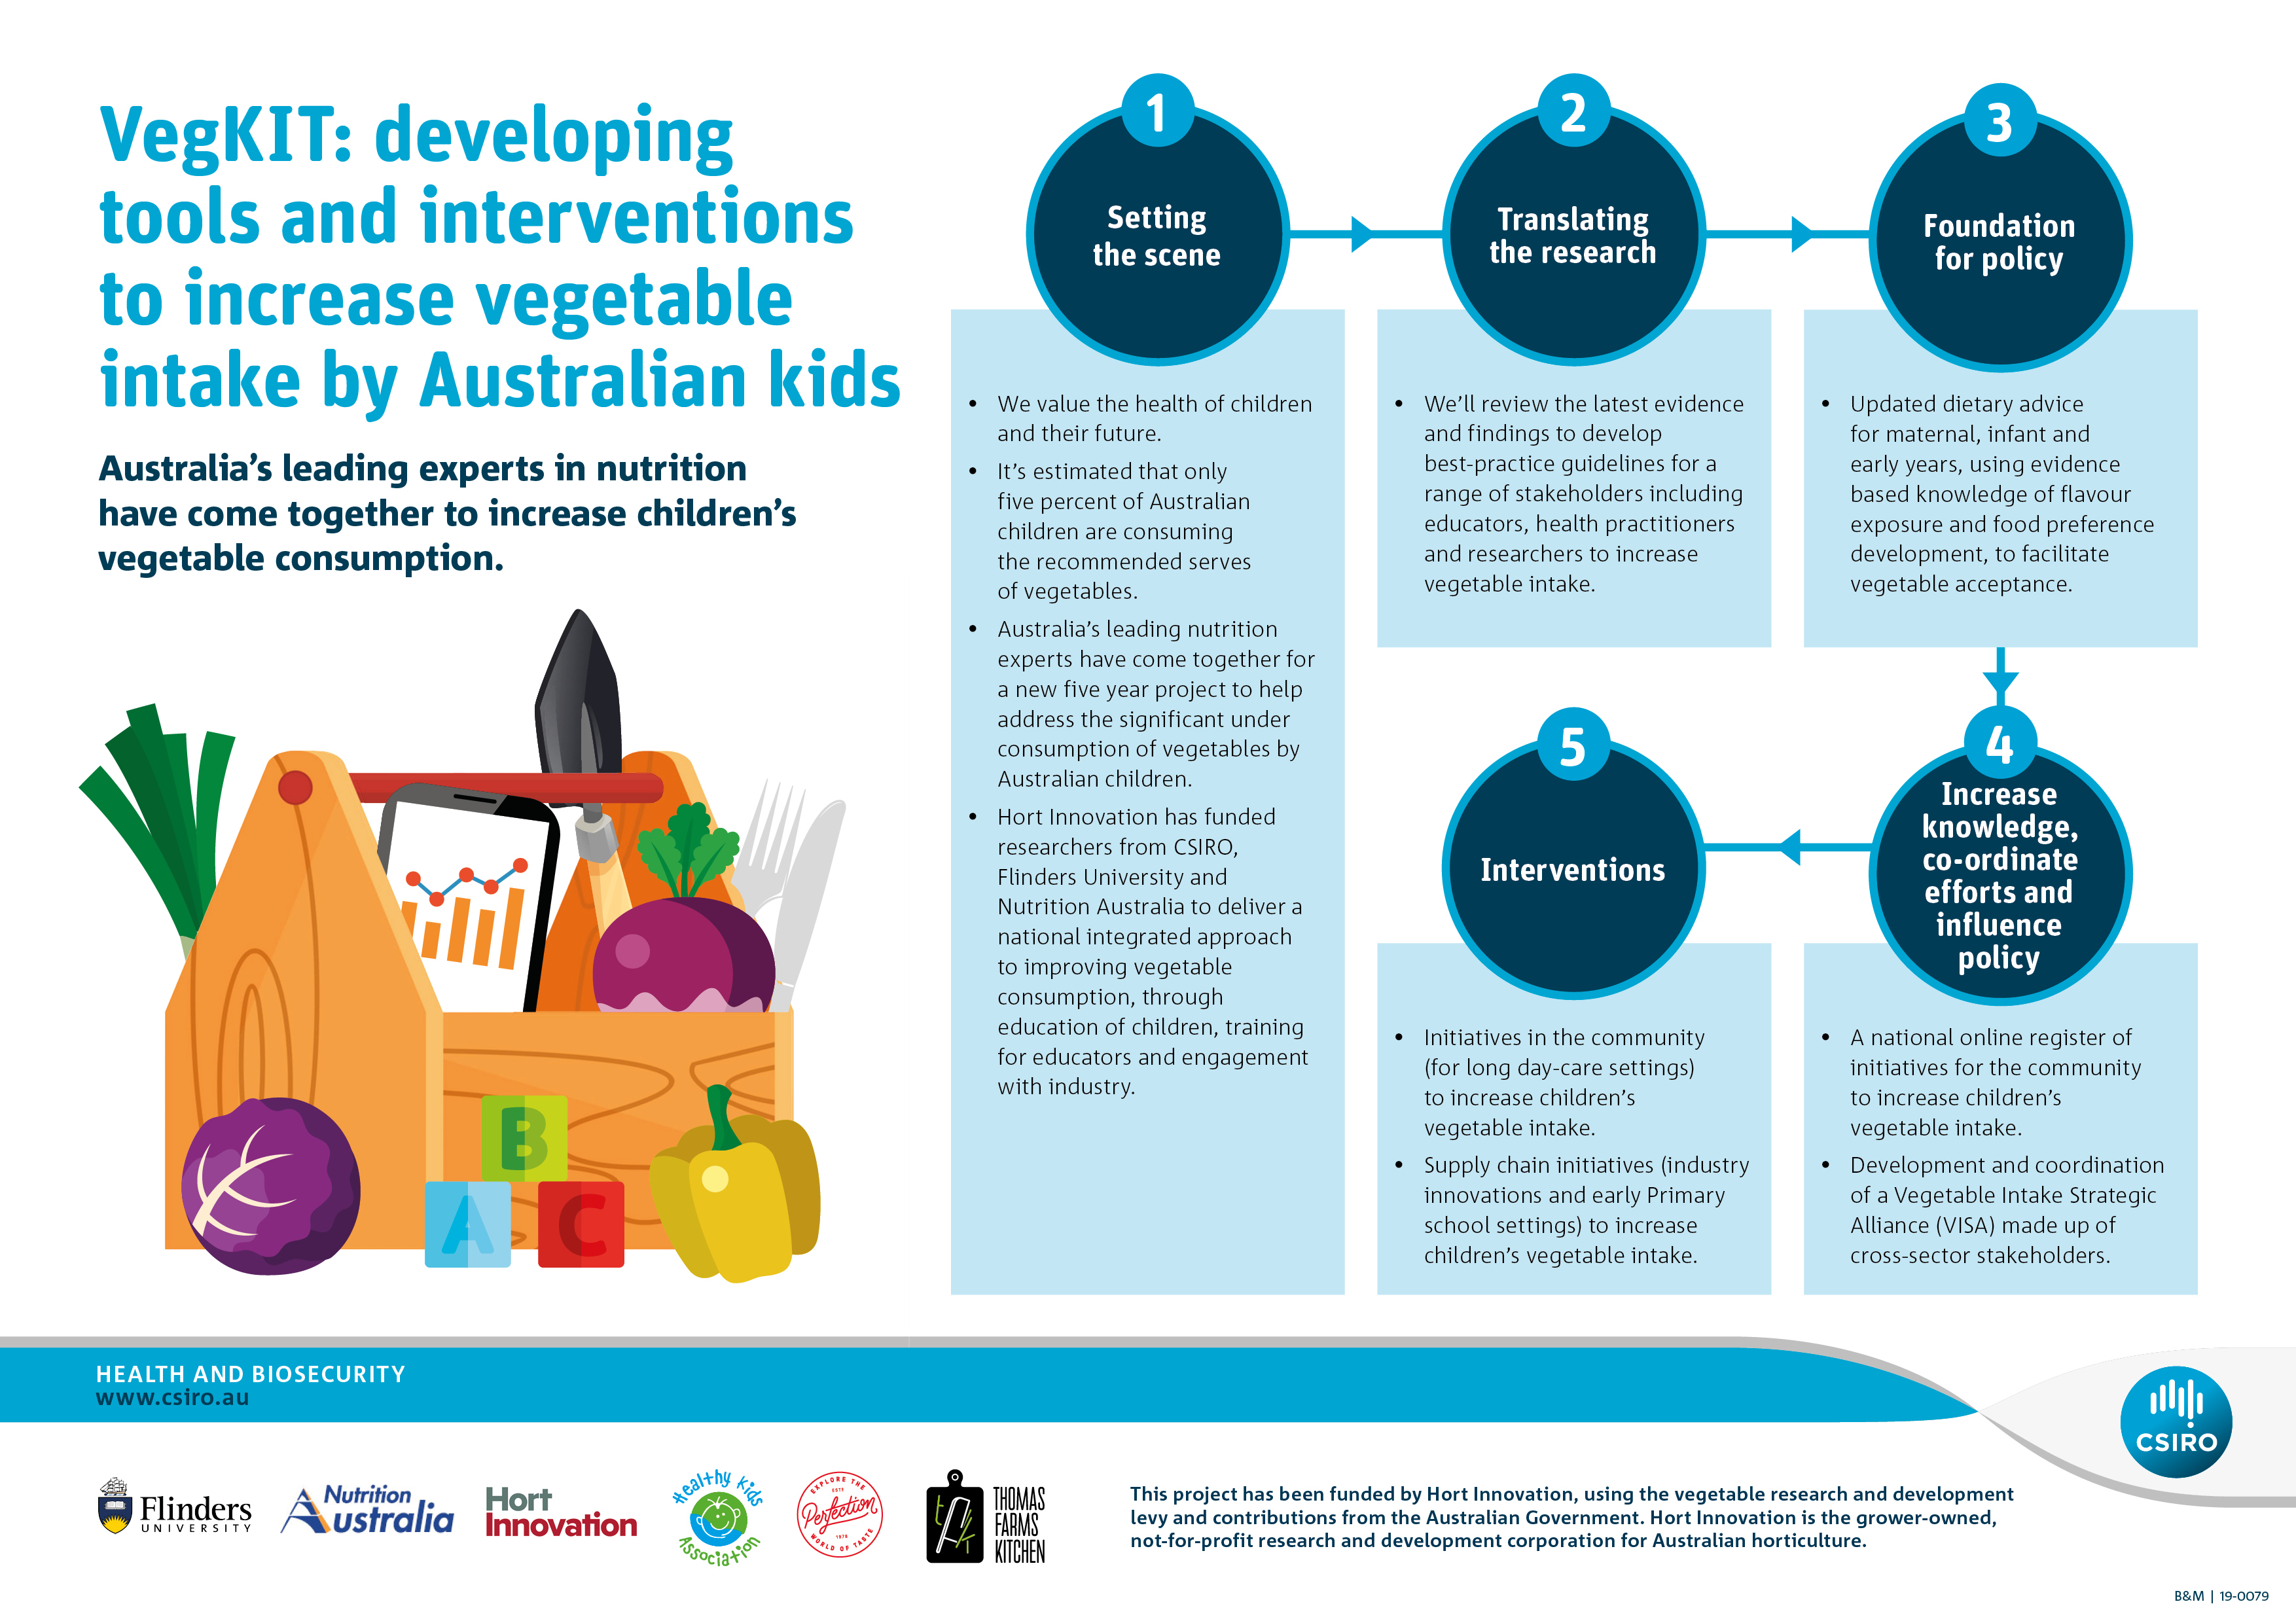 An info-graphic explaining the different activities being undertake as part of the VegKIT project